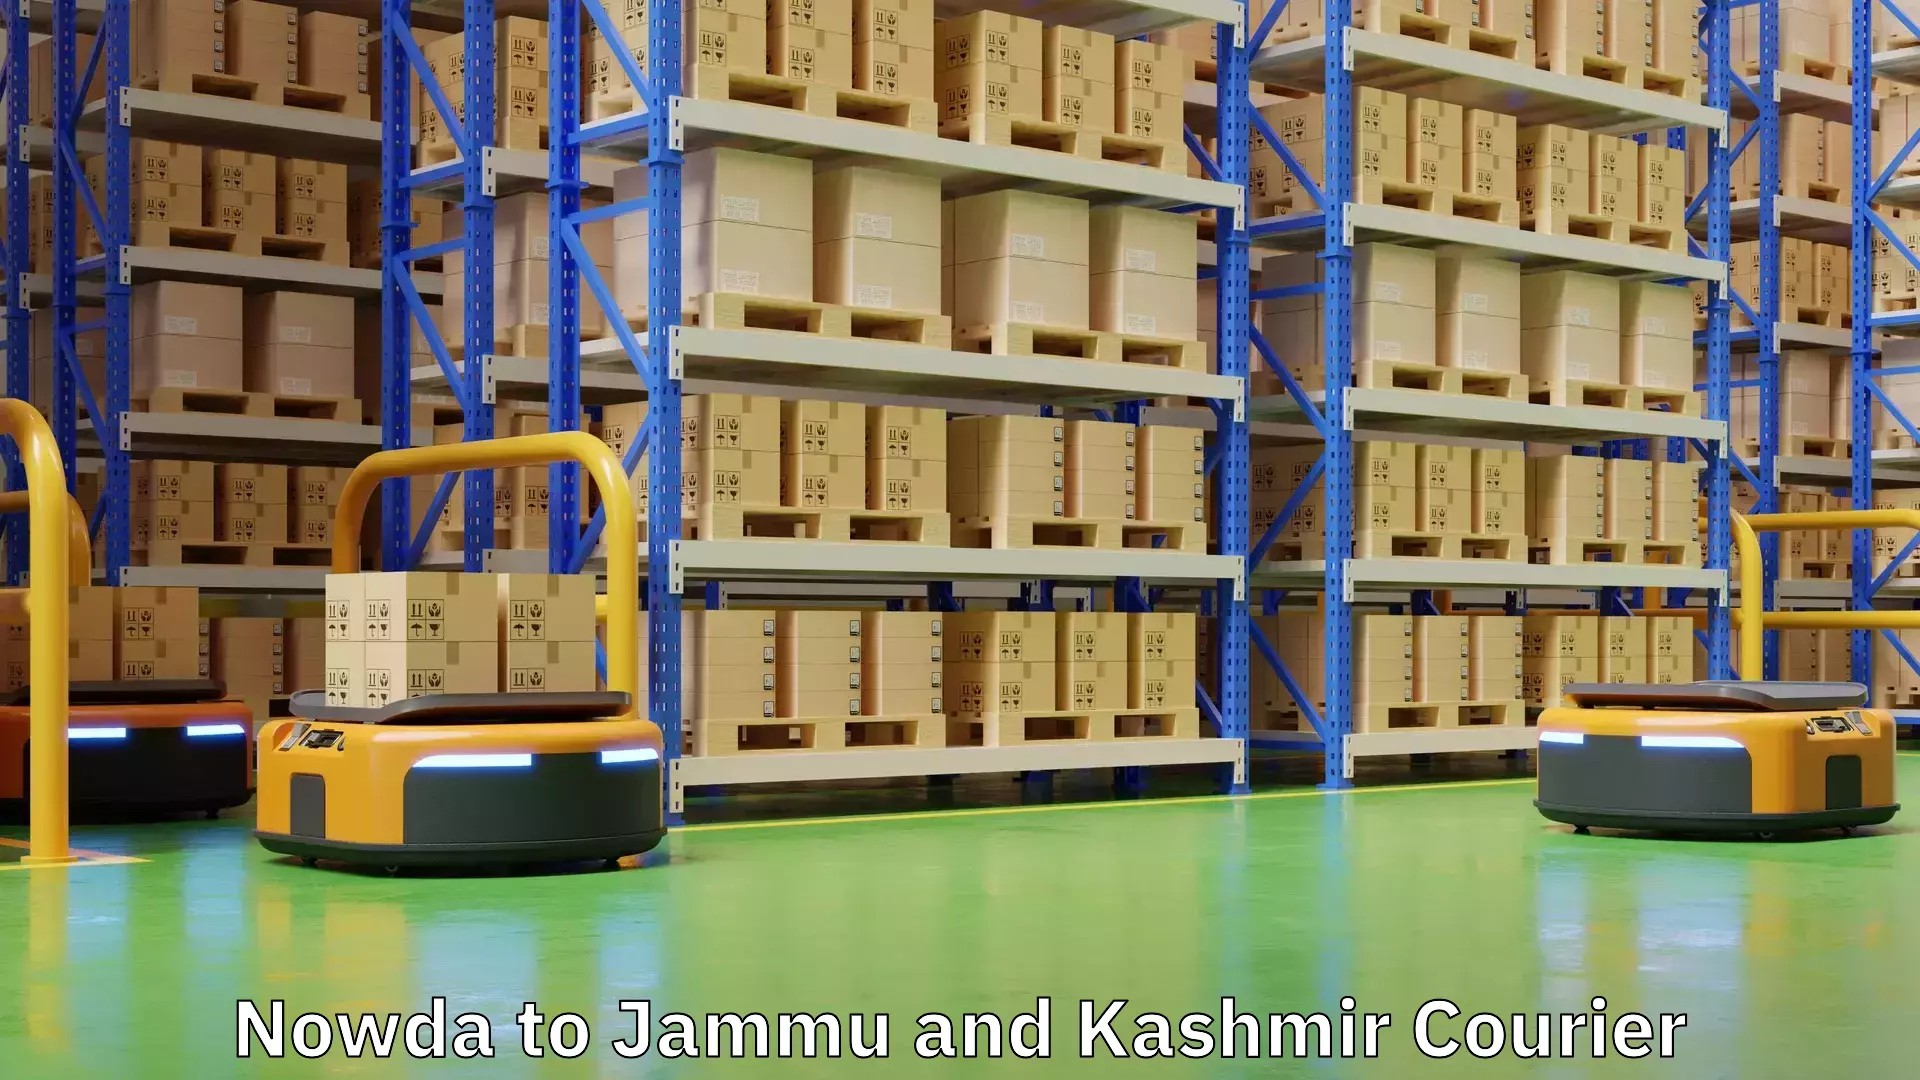 Smart shipping technology Nowda to Jammu and Kashmir